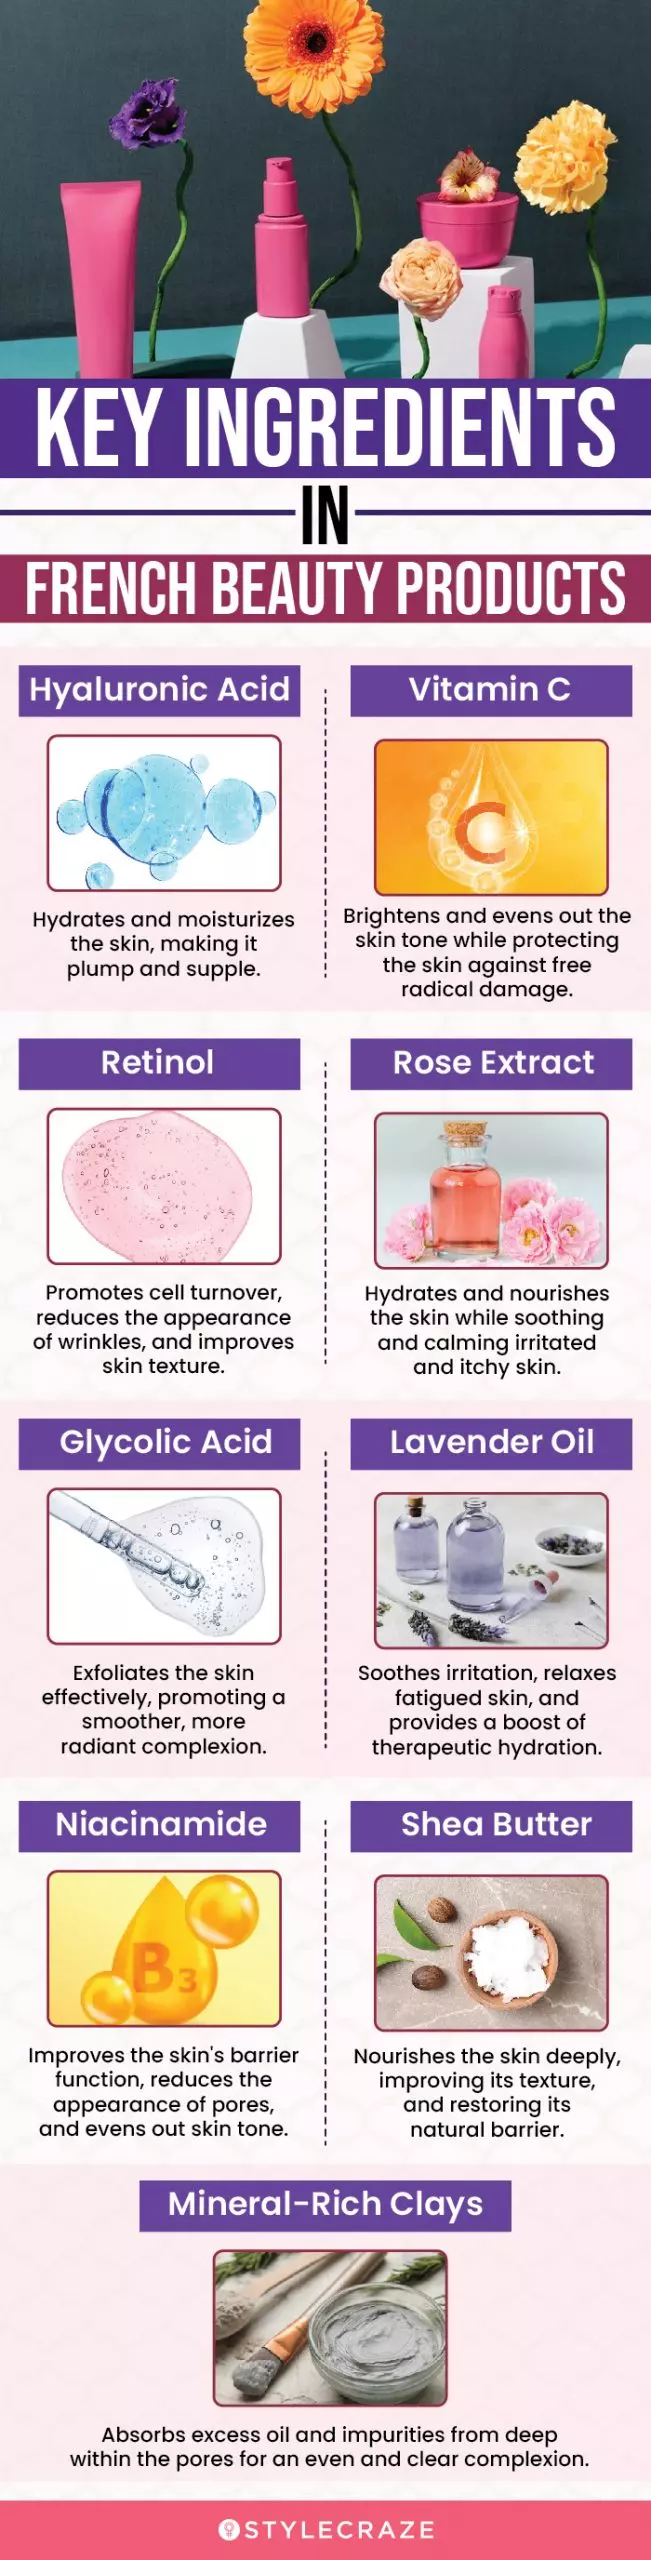 Key Ingredients In French Beauty Products (infographic)